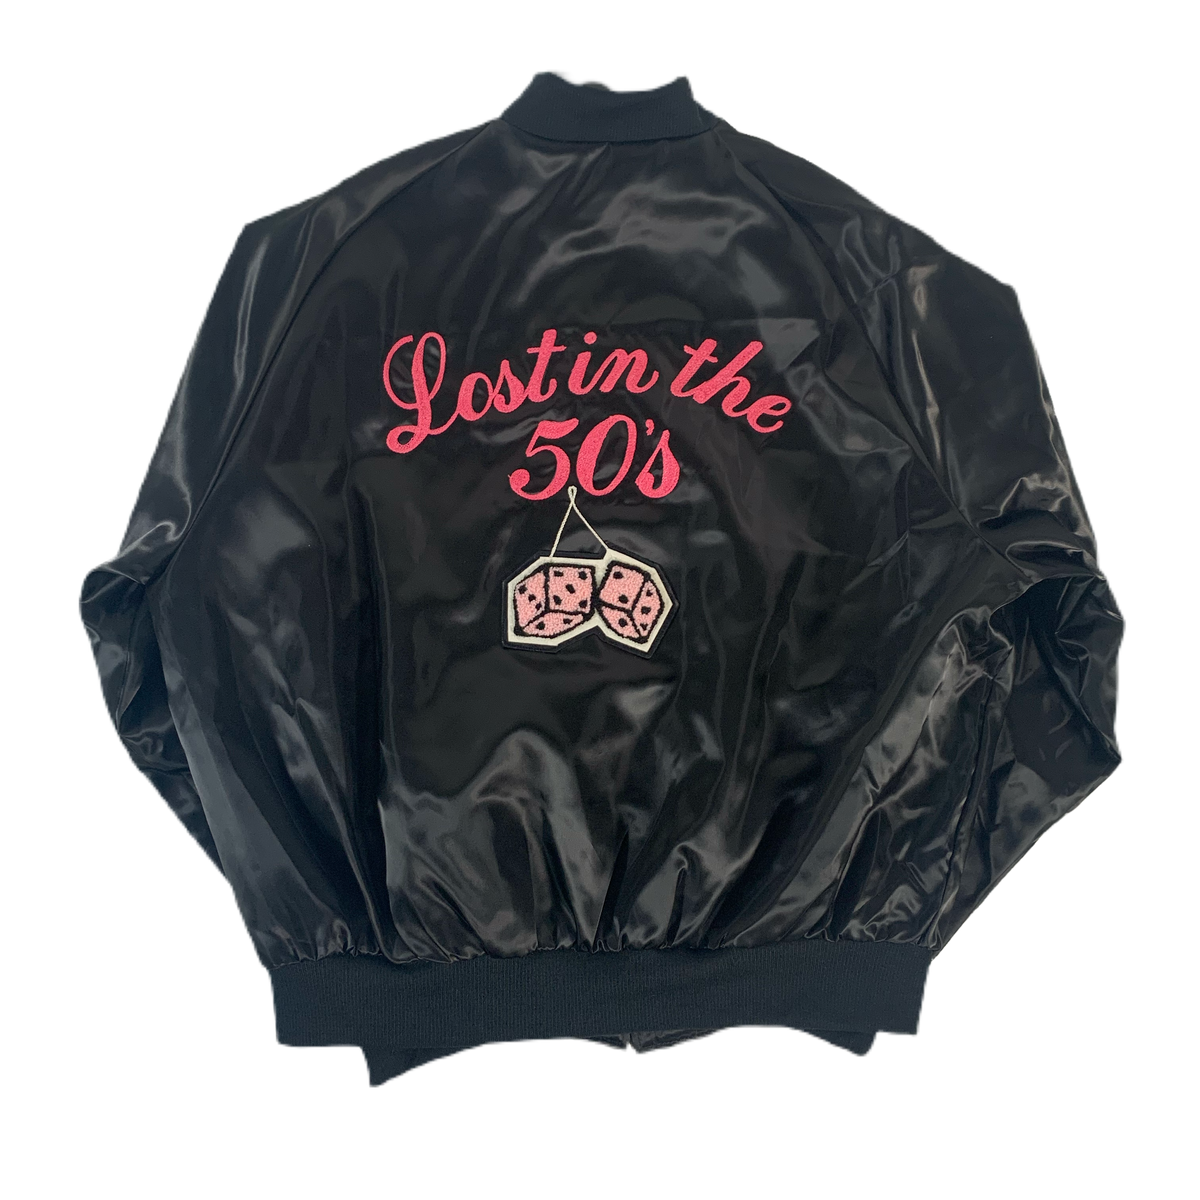 Vintage Lost in the 50’s “Tour” Chain Stitch Jacket - jointcustodydc